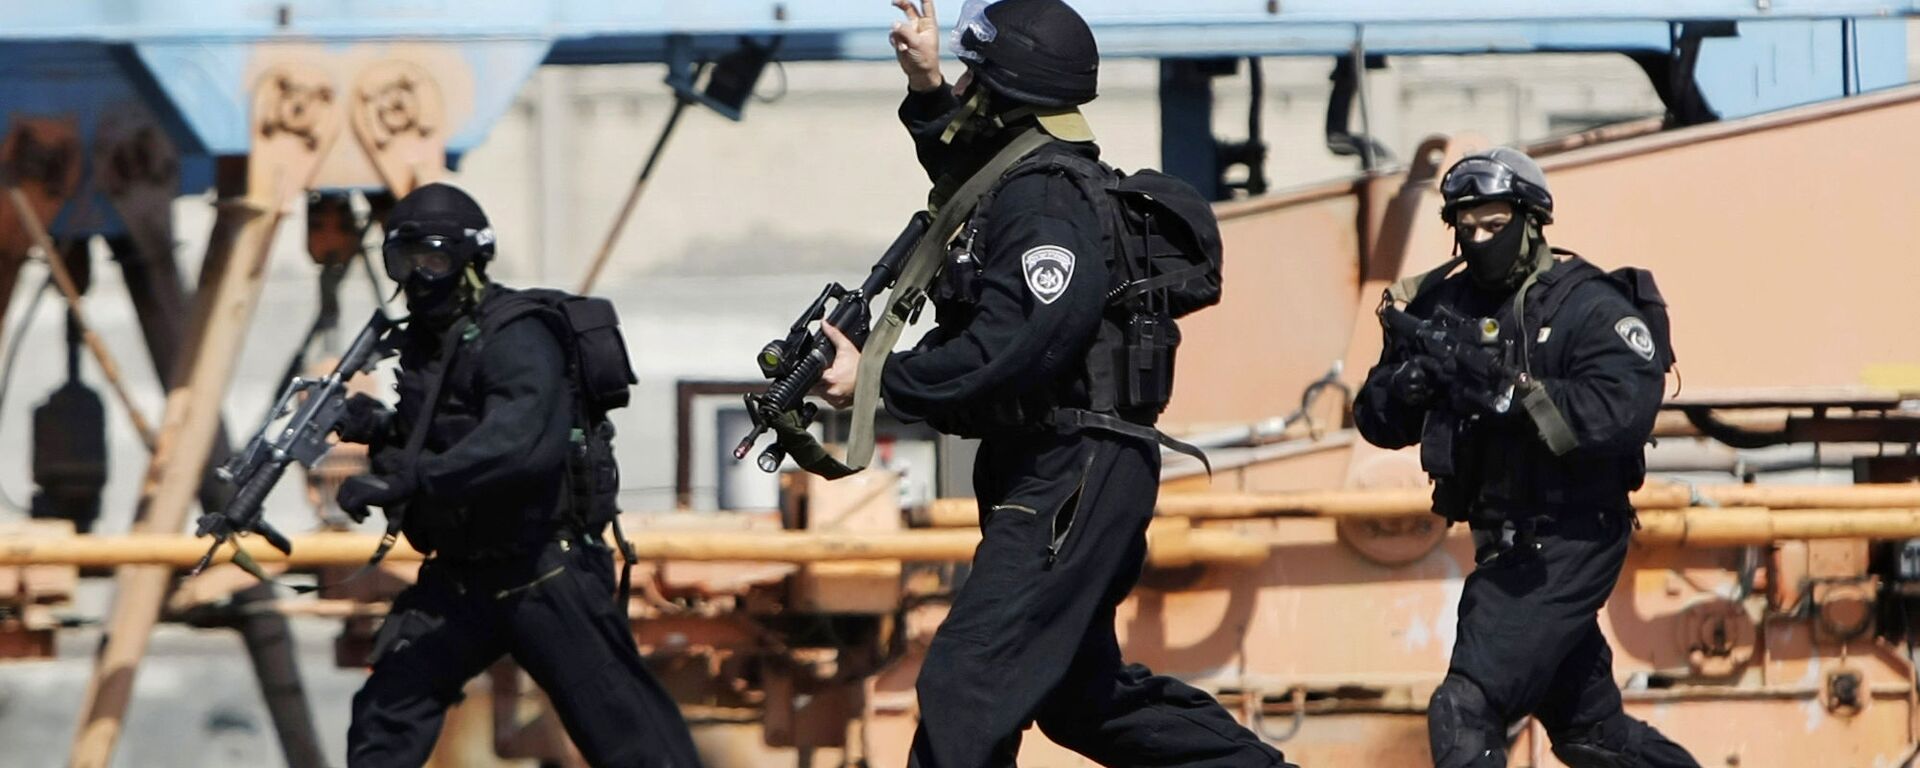 Israeli special forces police officers run during a drill simulating an attack on a bus, in the port of Ashdod, Israel (File) - Sputnik International, 1920, 25.05.2022